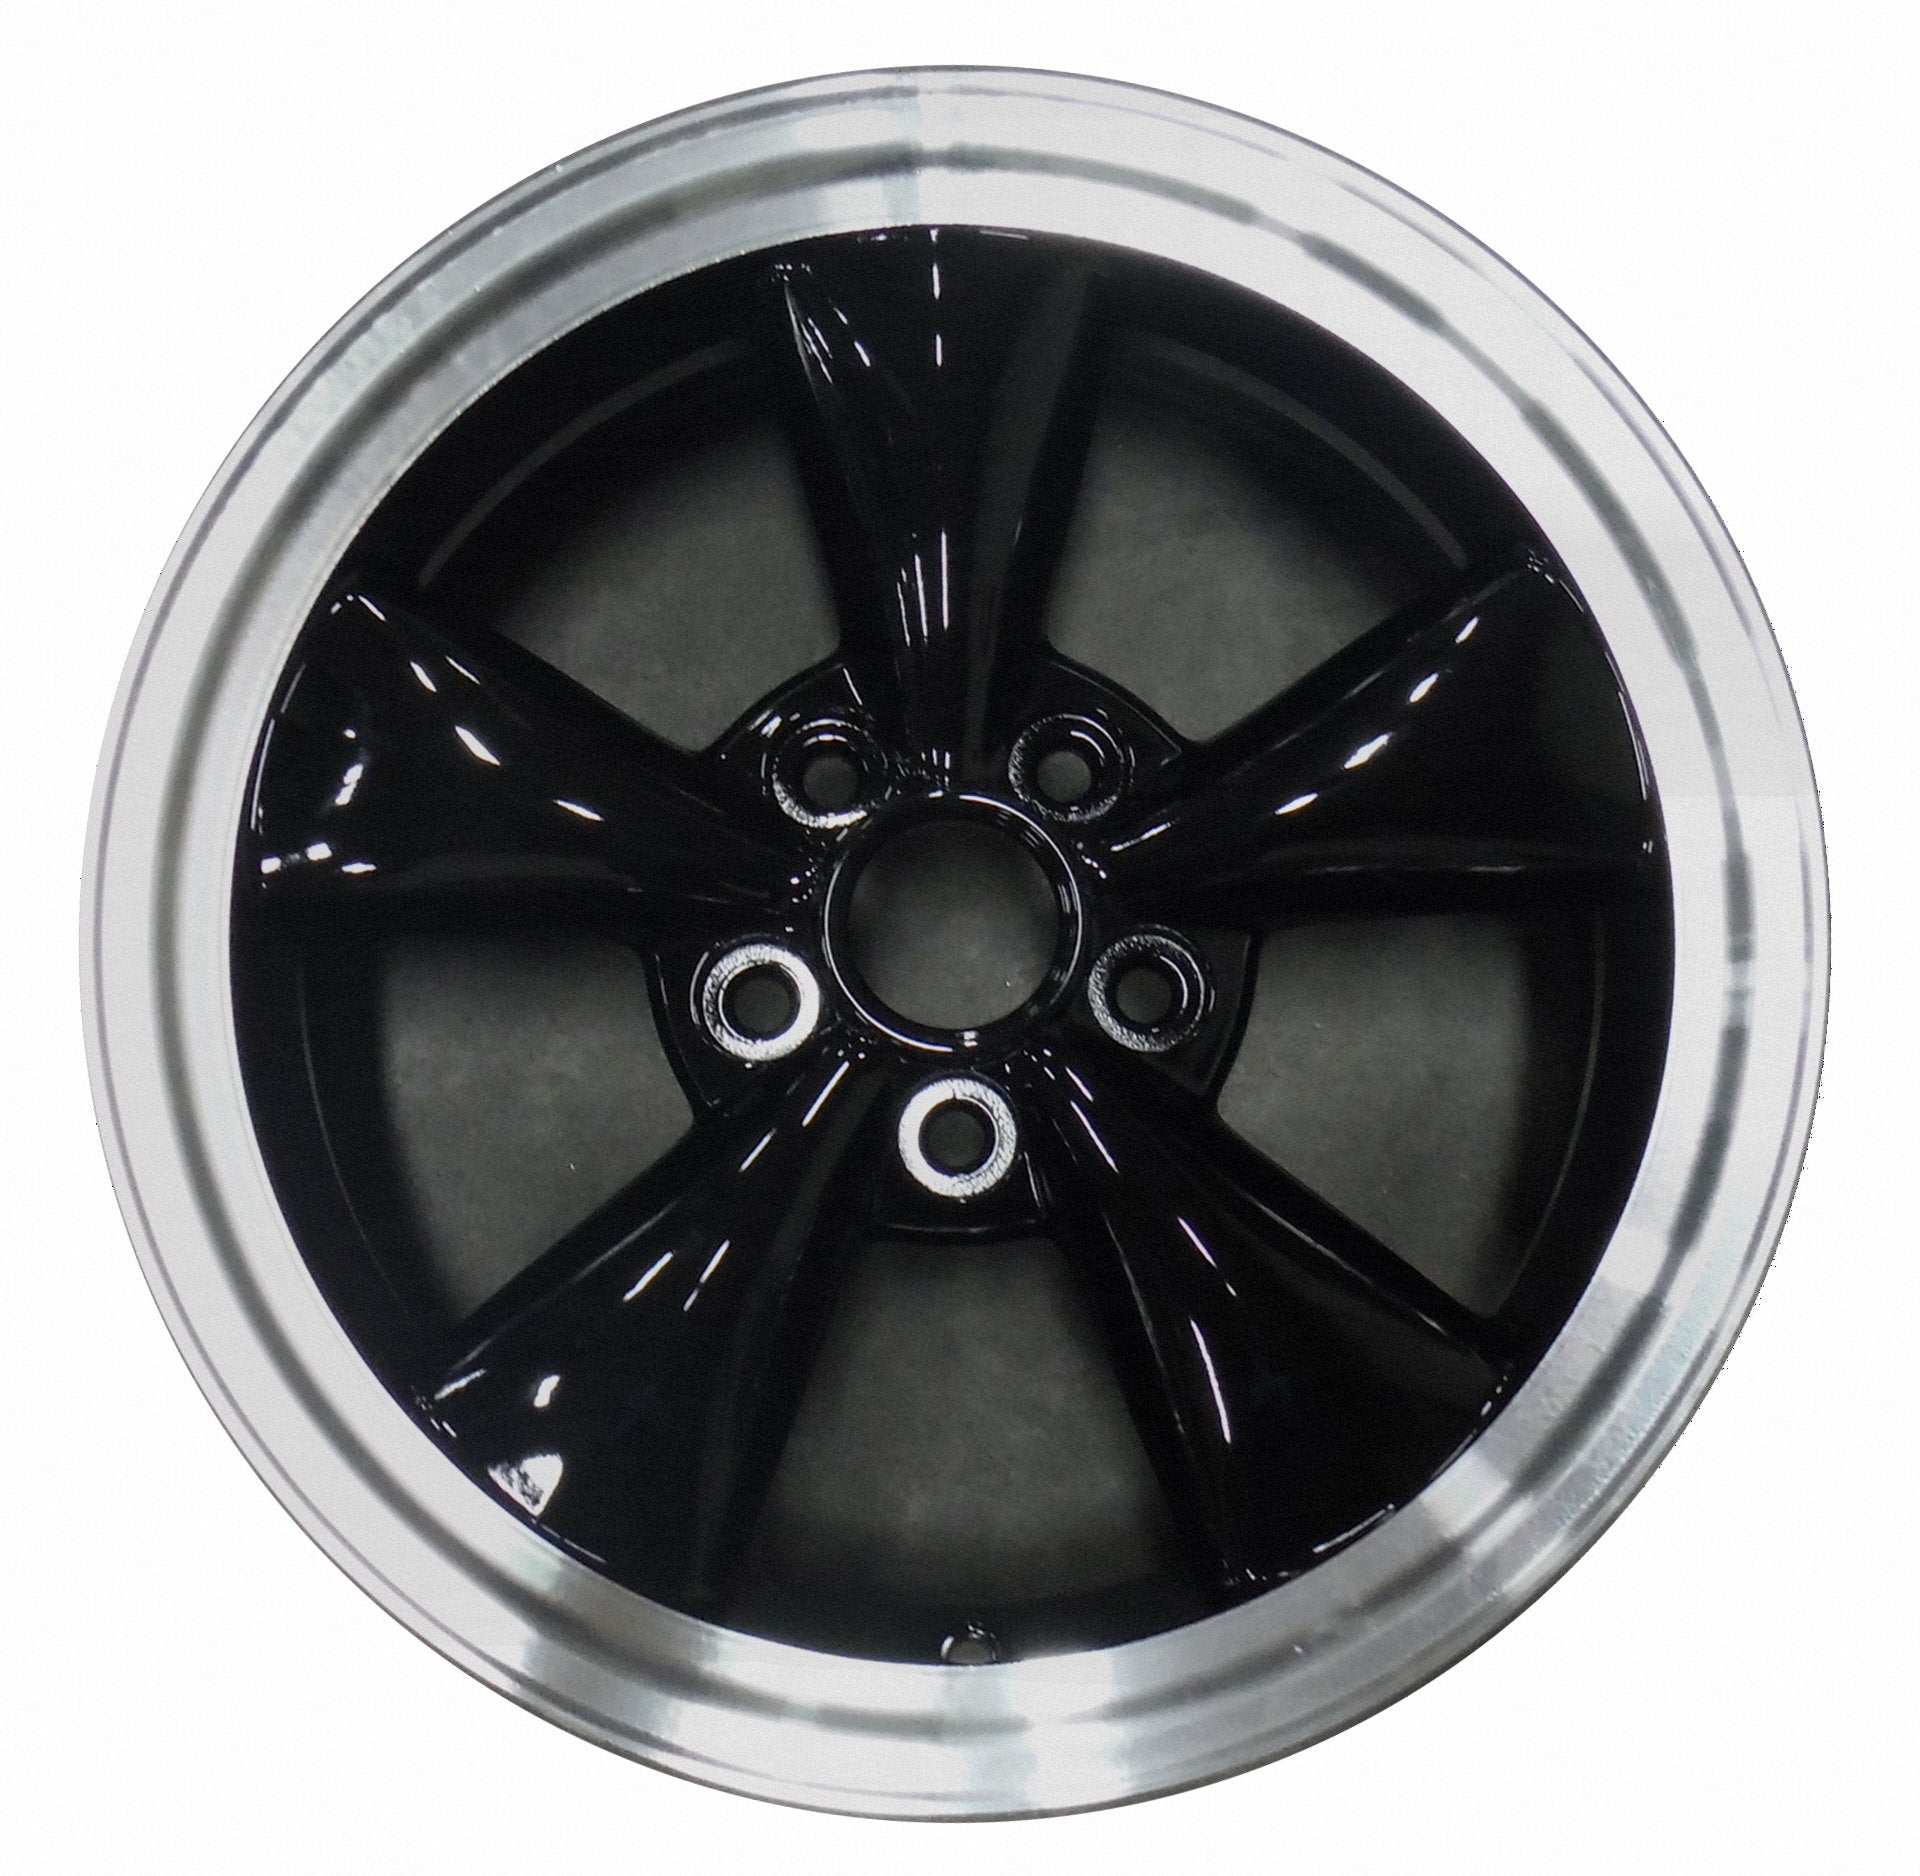 Ford Mustang  2005, 2006, 2007, 2008, 2009 Factory OEM Car Wheel Size 17x8 Alloy WAO.3589.PB01.FCBRT